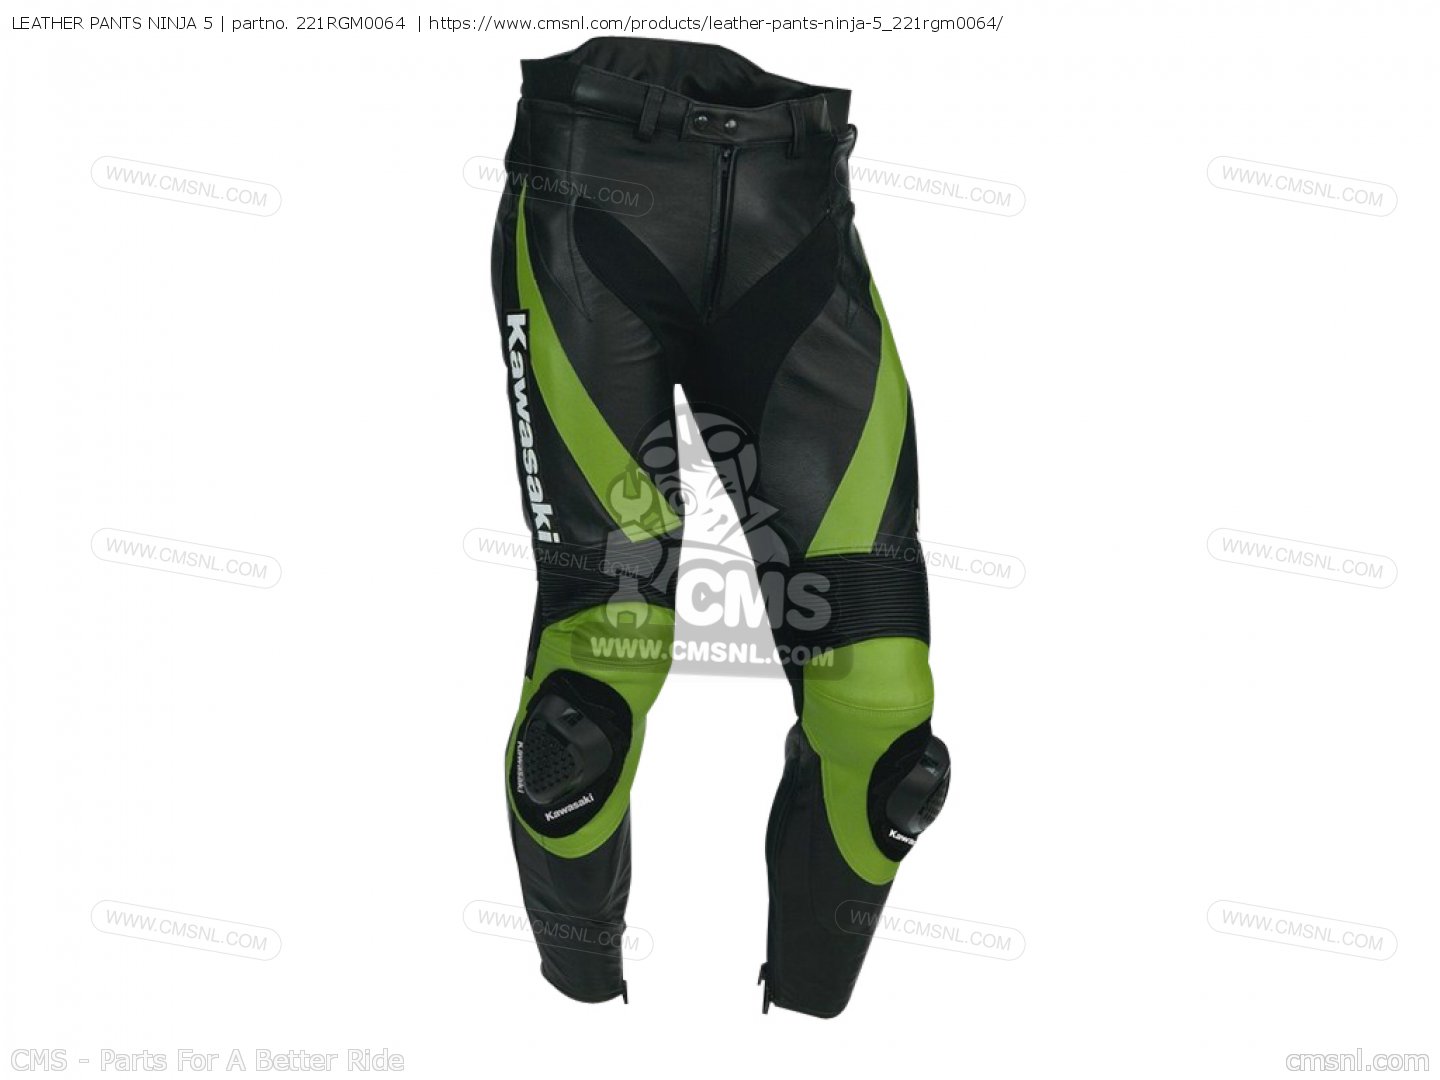 4SR Motorcycle clothing and protective gear - Long Motorcycle Jeans